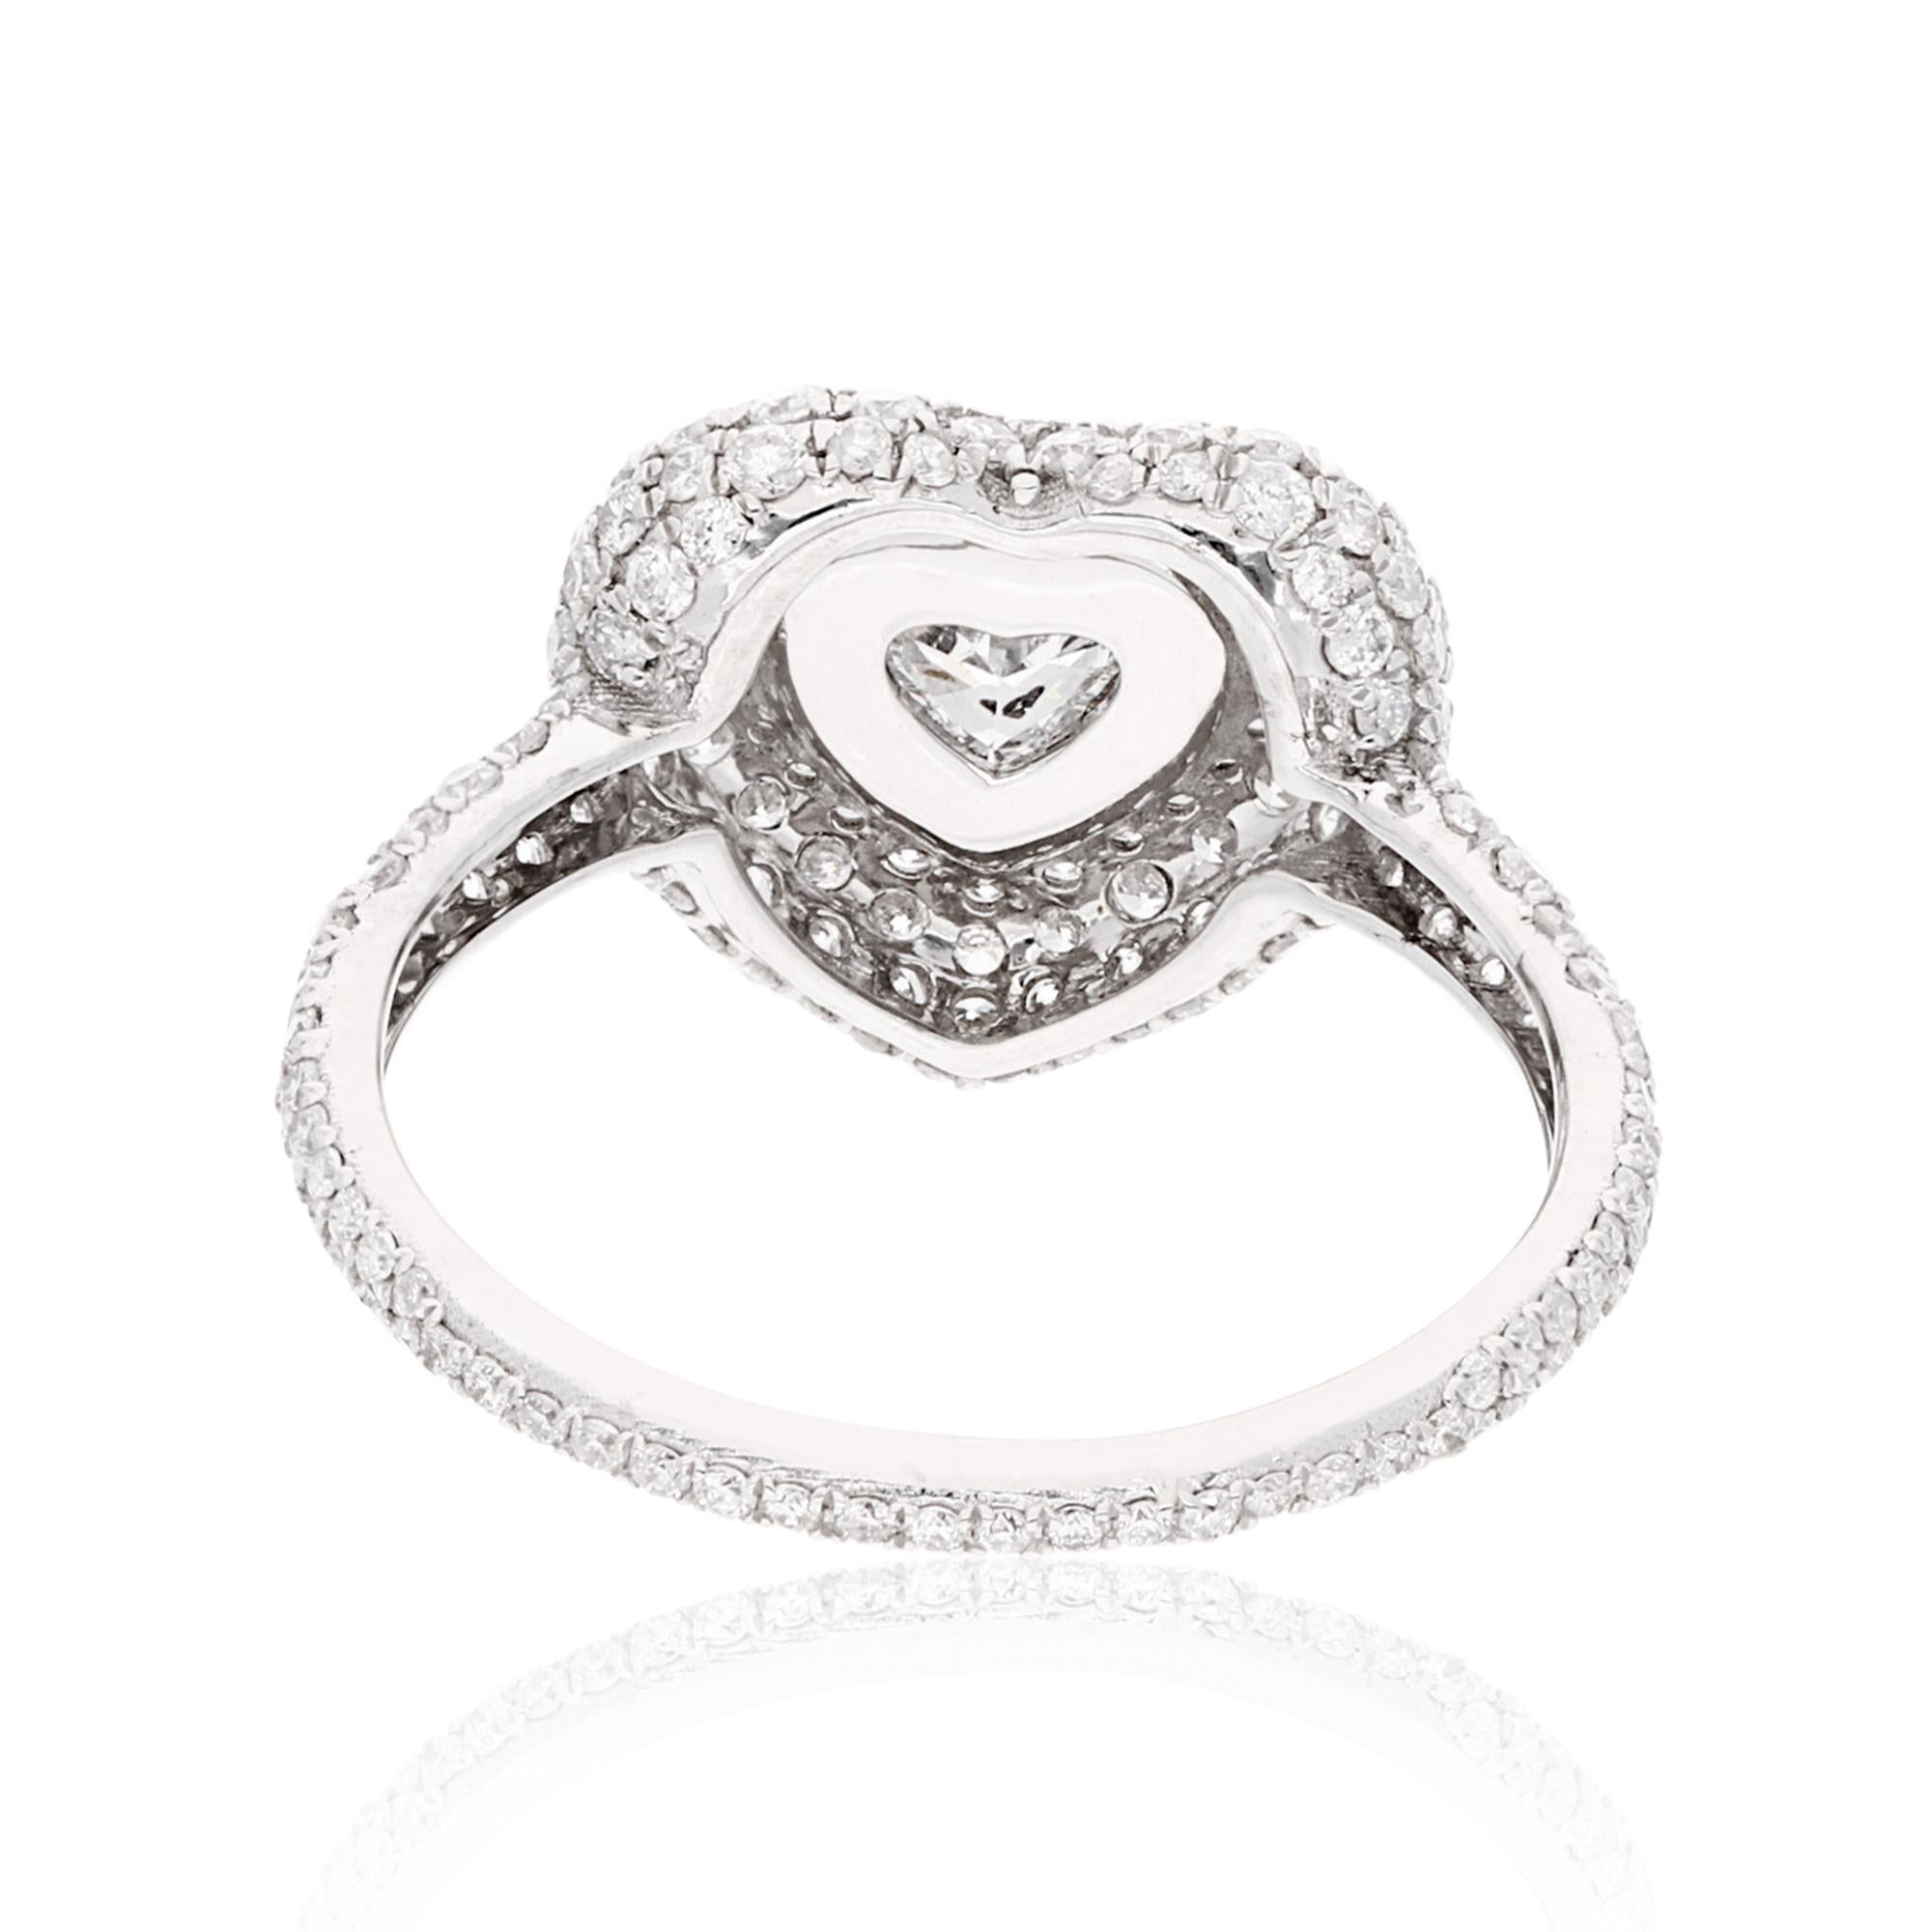 Make a bold statement with this breathtaking handmade cocktail ring, featuring a mesmerizing 1.57 carat heart-shaped diamond pavé set in 18-karat white gold. This ring exemplifies the pinnacle of fine jewelry craftsmanship and design.

At the center